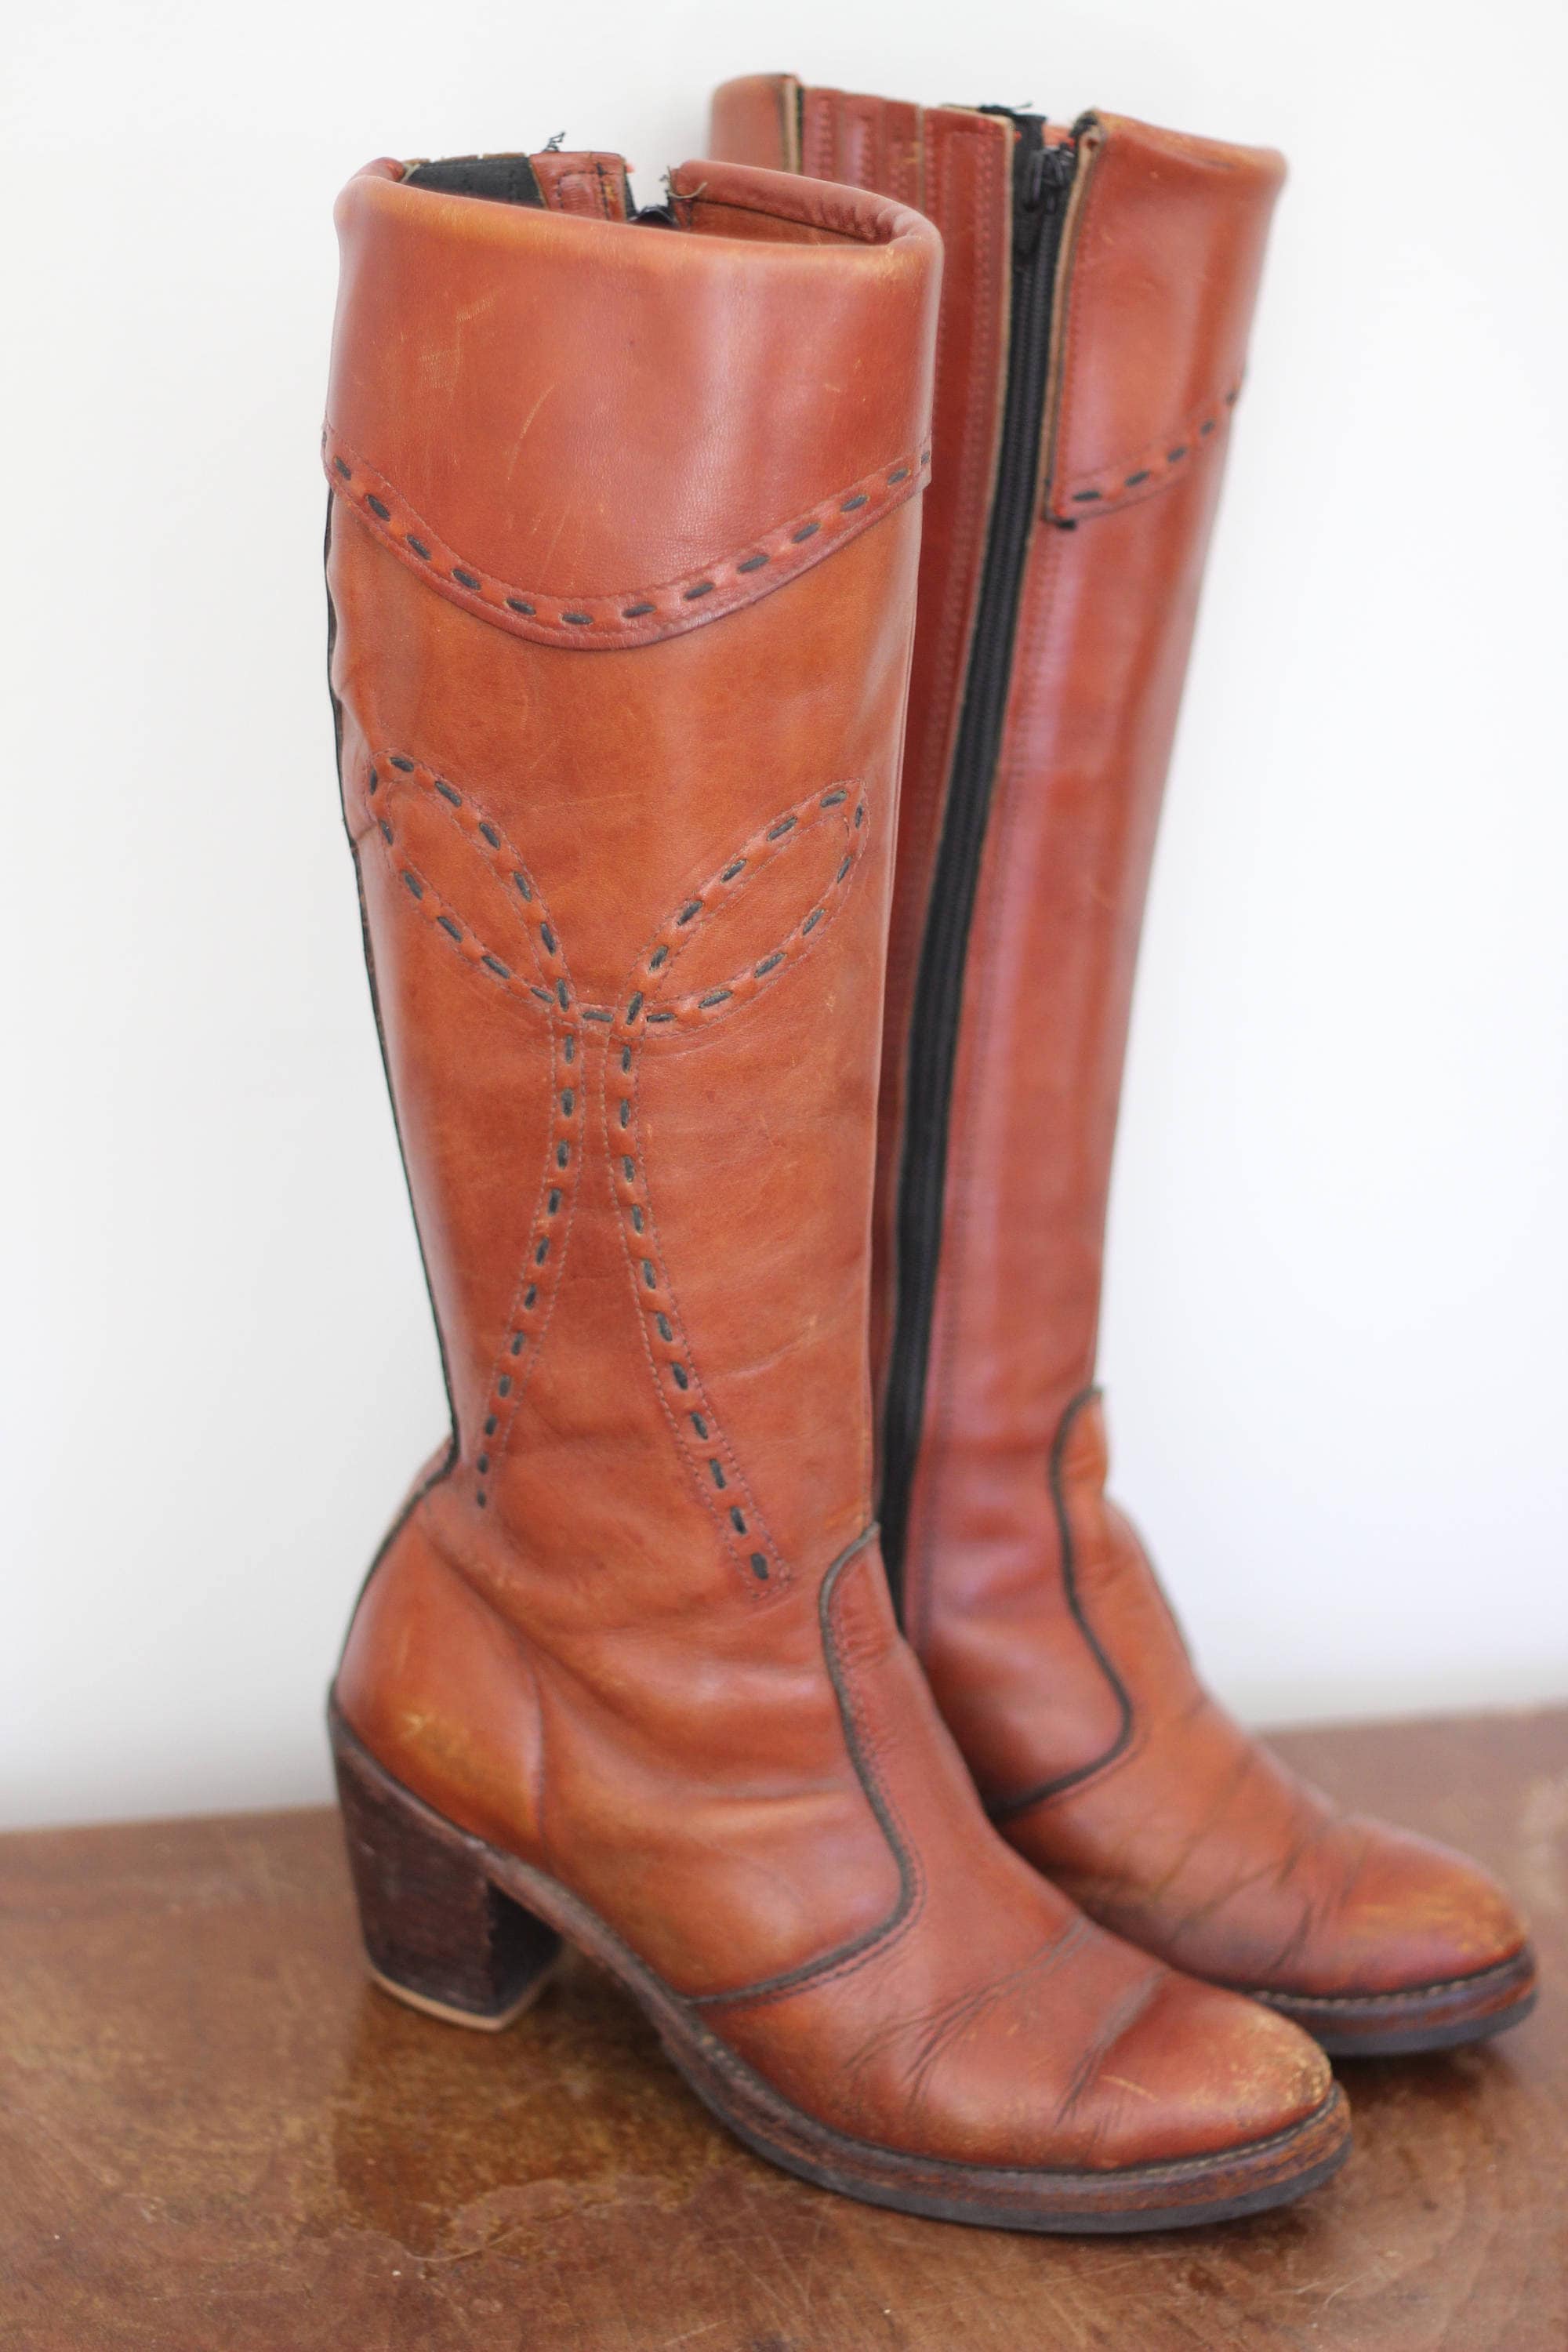 Women S Brown Leather Knee High Fashion Boots With Heels Vintage Zip Up Size 6 5 Round Toe Boho